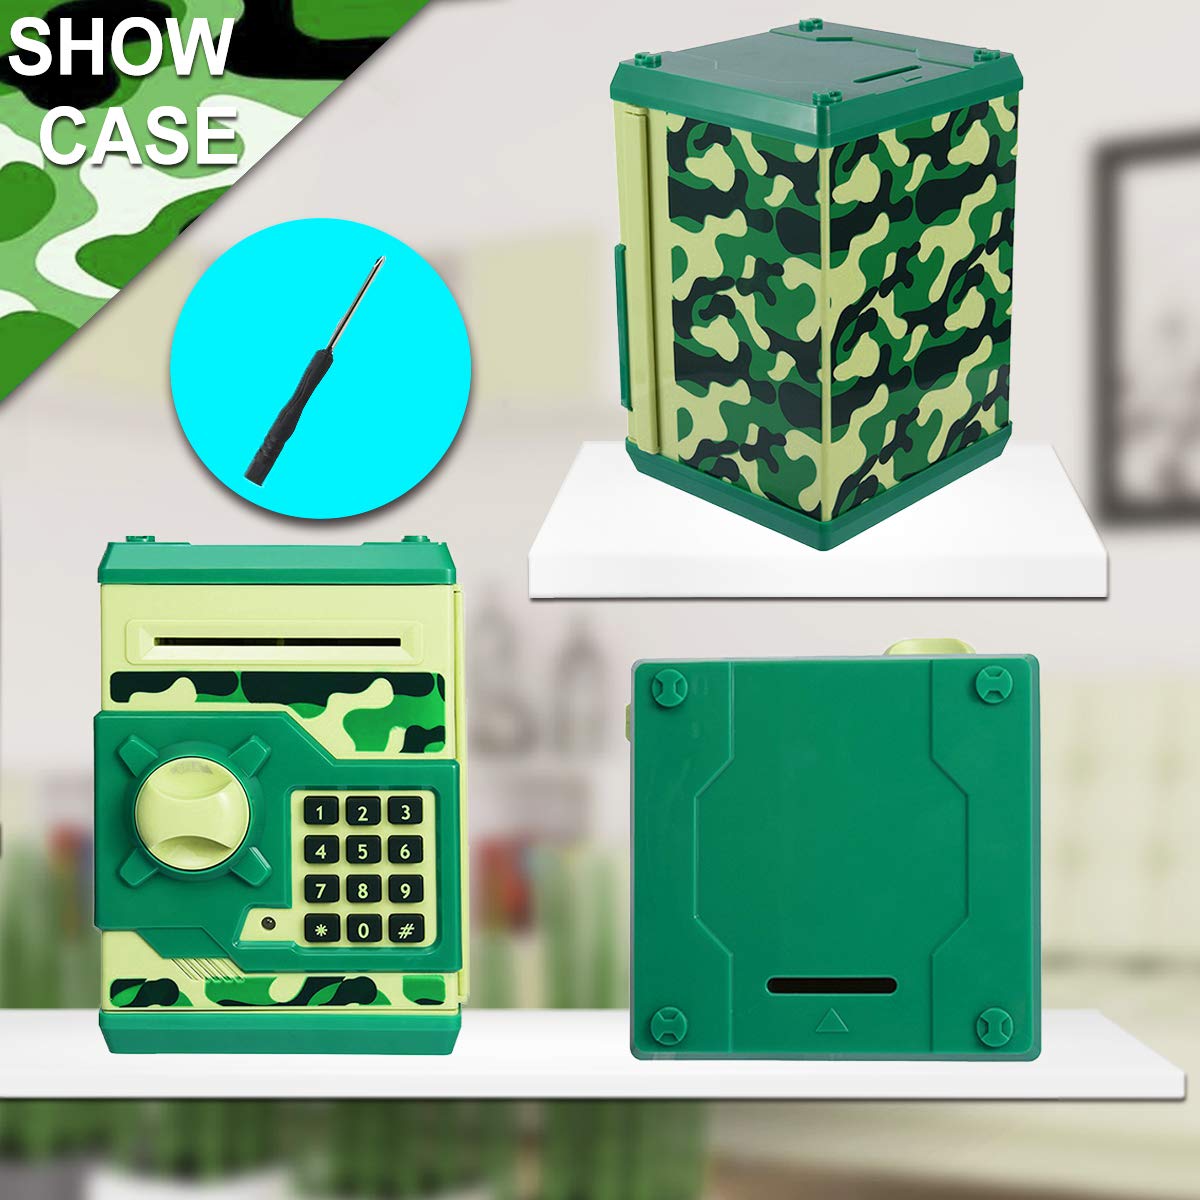 TOPBRY Piggy Bank for Kids,Electronic Password Piggy Bank Kids Safe Bank Mini ATM Piggy Bank Toy for 3-14 Year Old Boys and Girls (Camouflage Green)